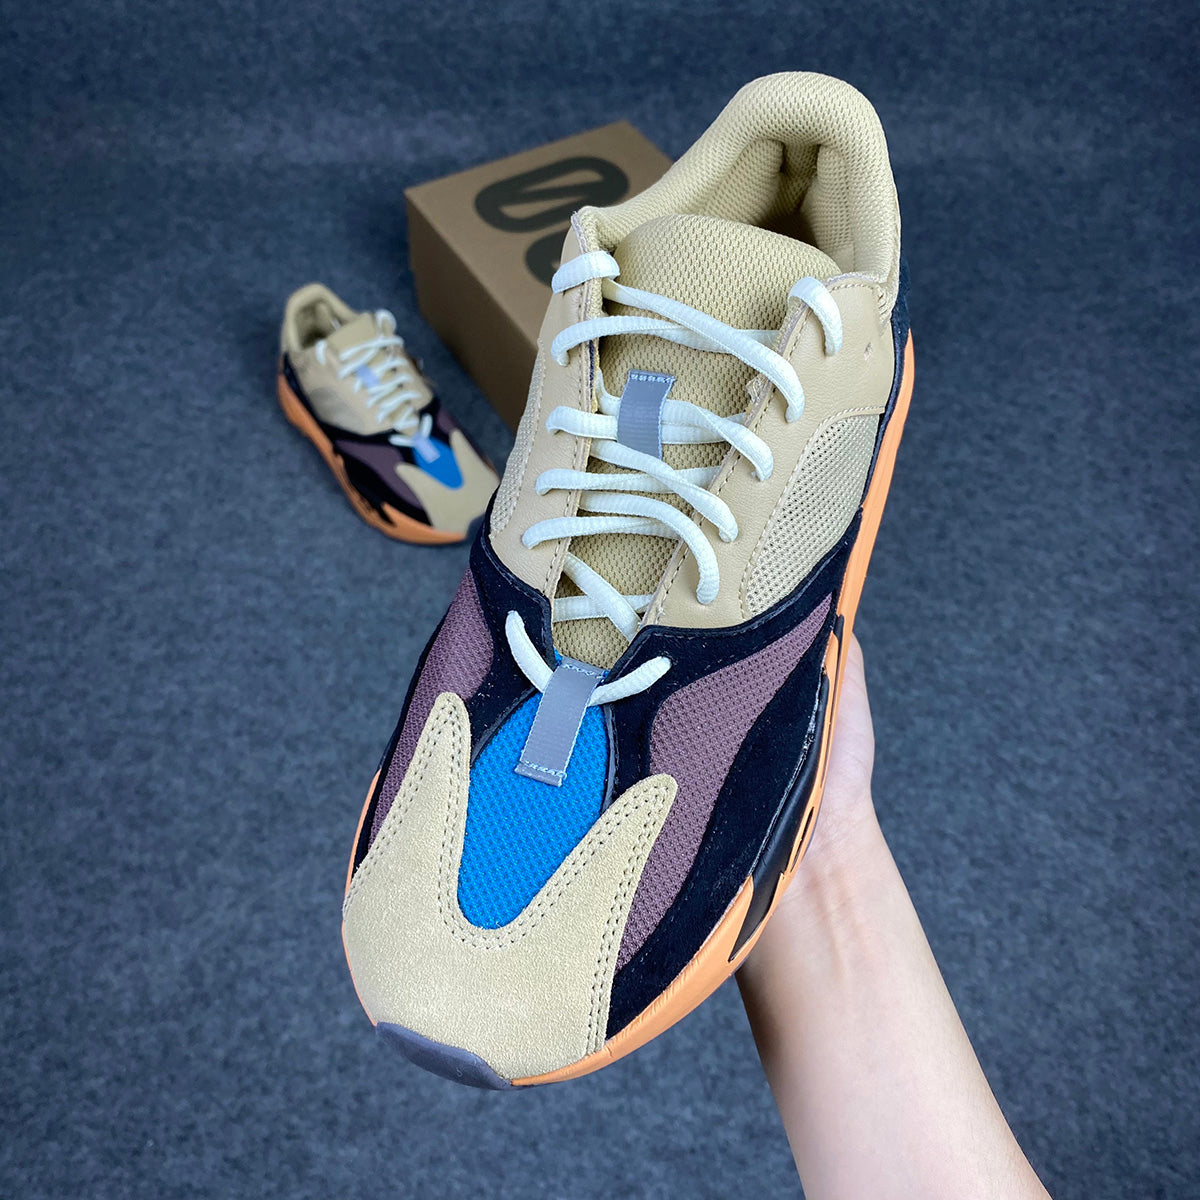 Yeezy Boost 700 'Enflame Amber'